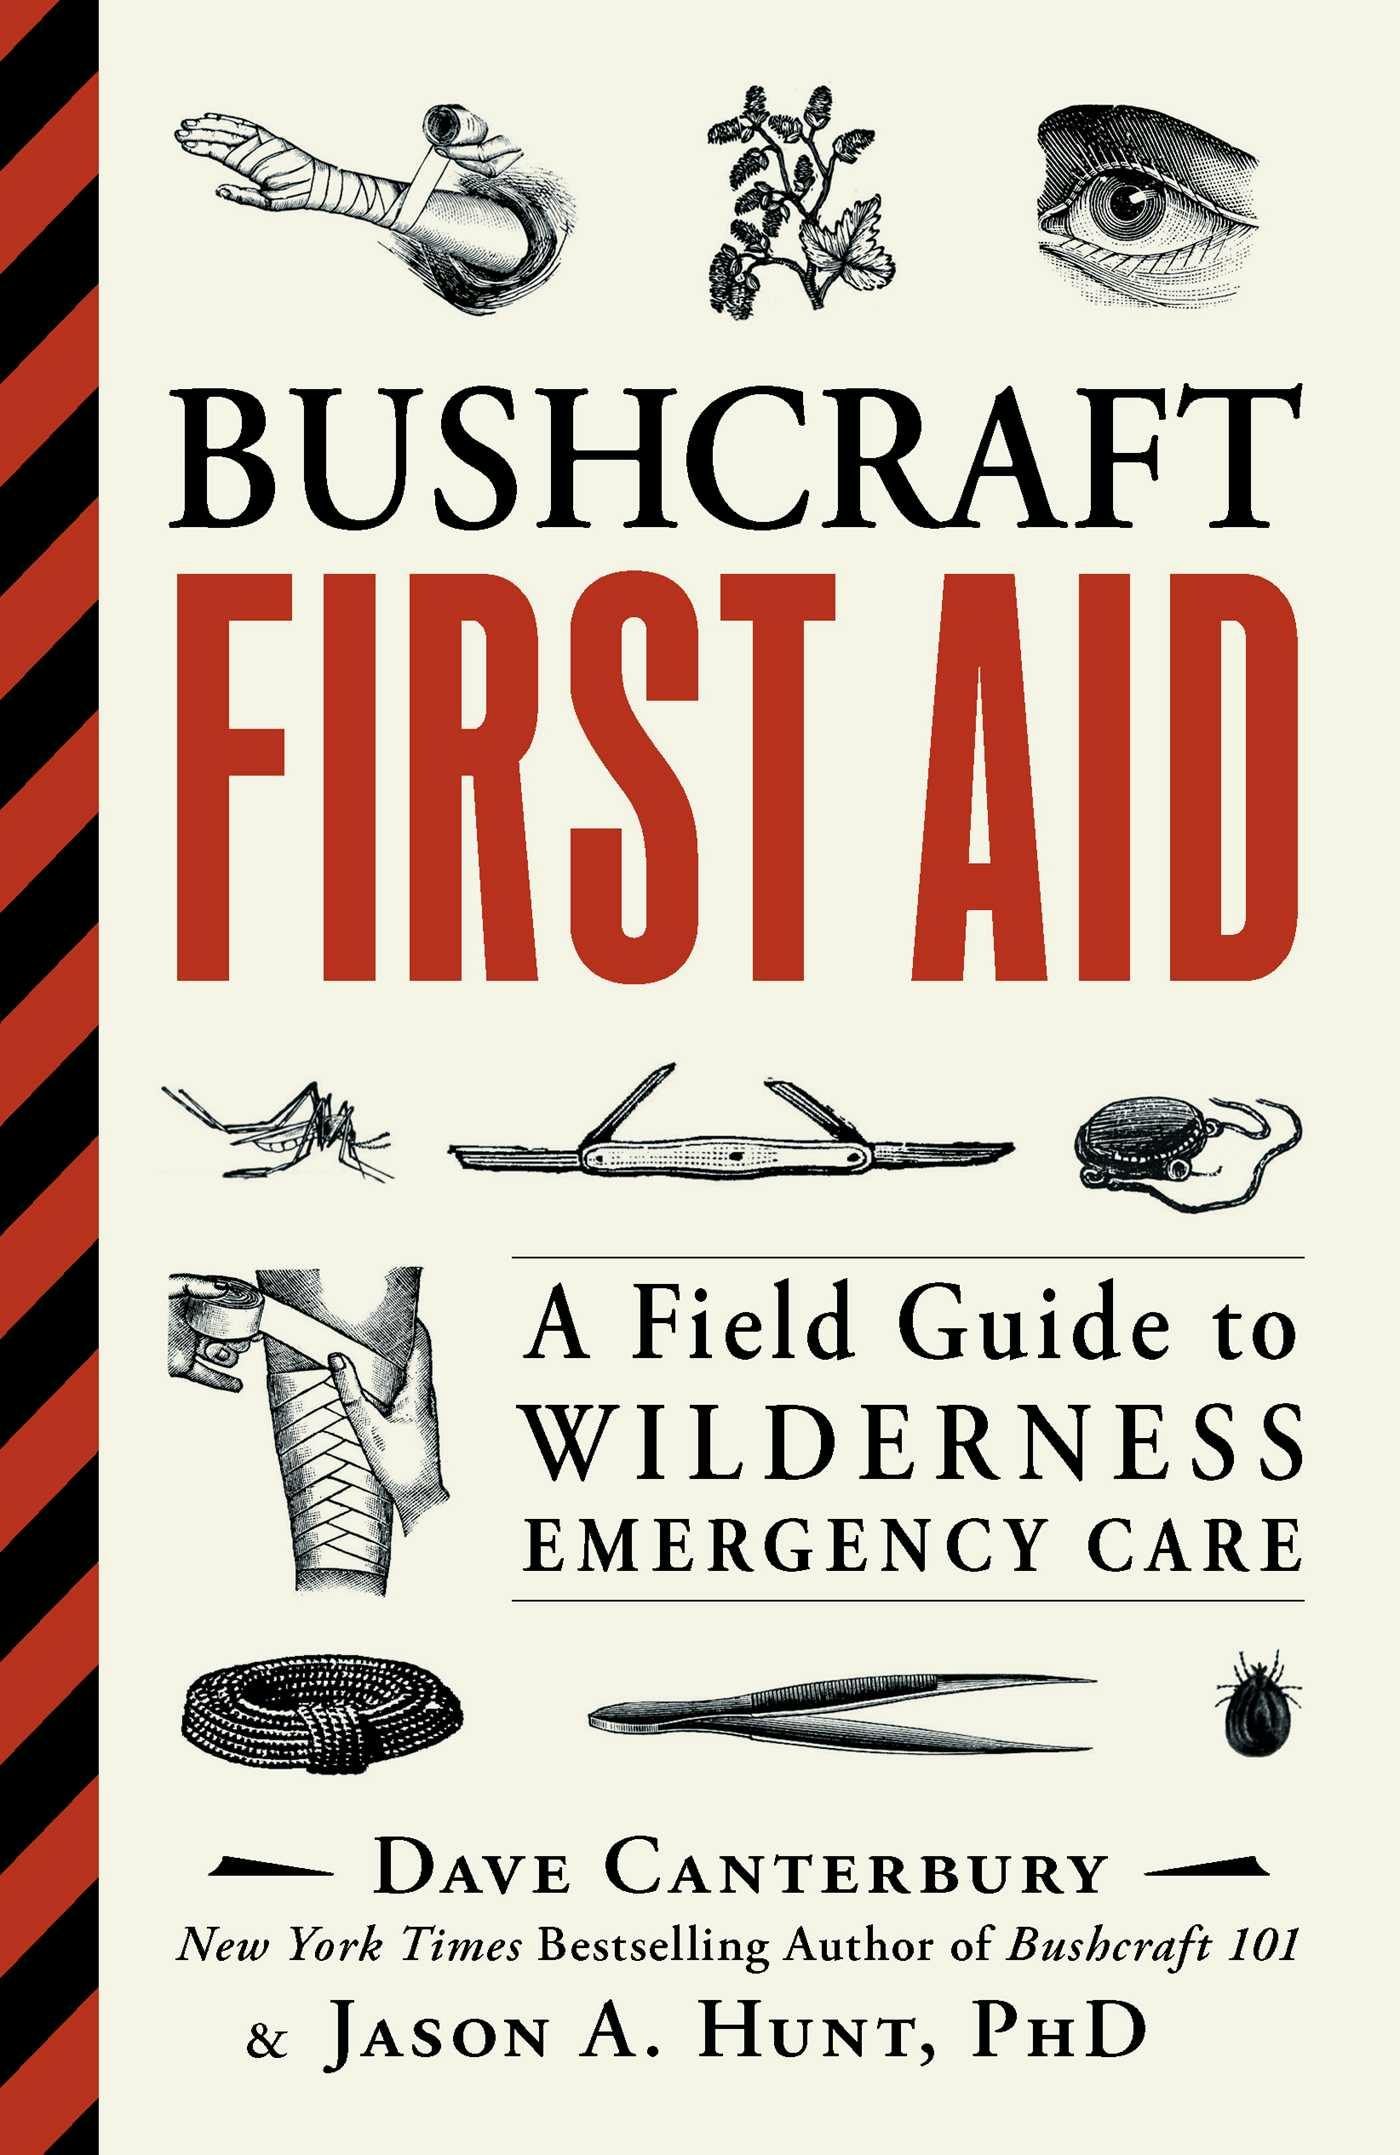 Bushcraft First Aid: A Field Guide to Wilderness Emergency Care - Dave Canterbury, Jason A. Hunt